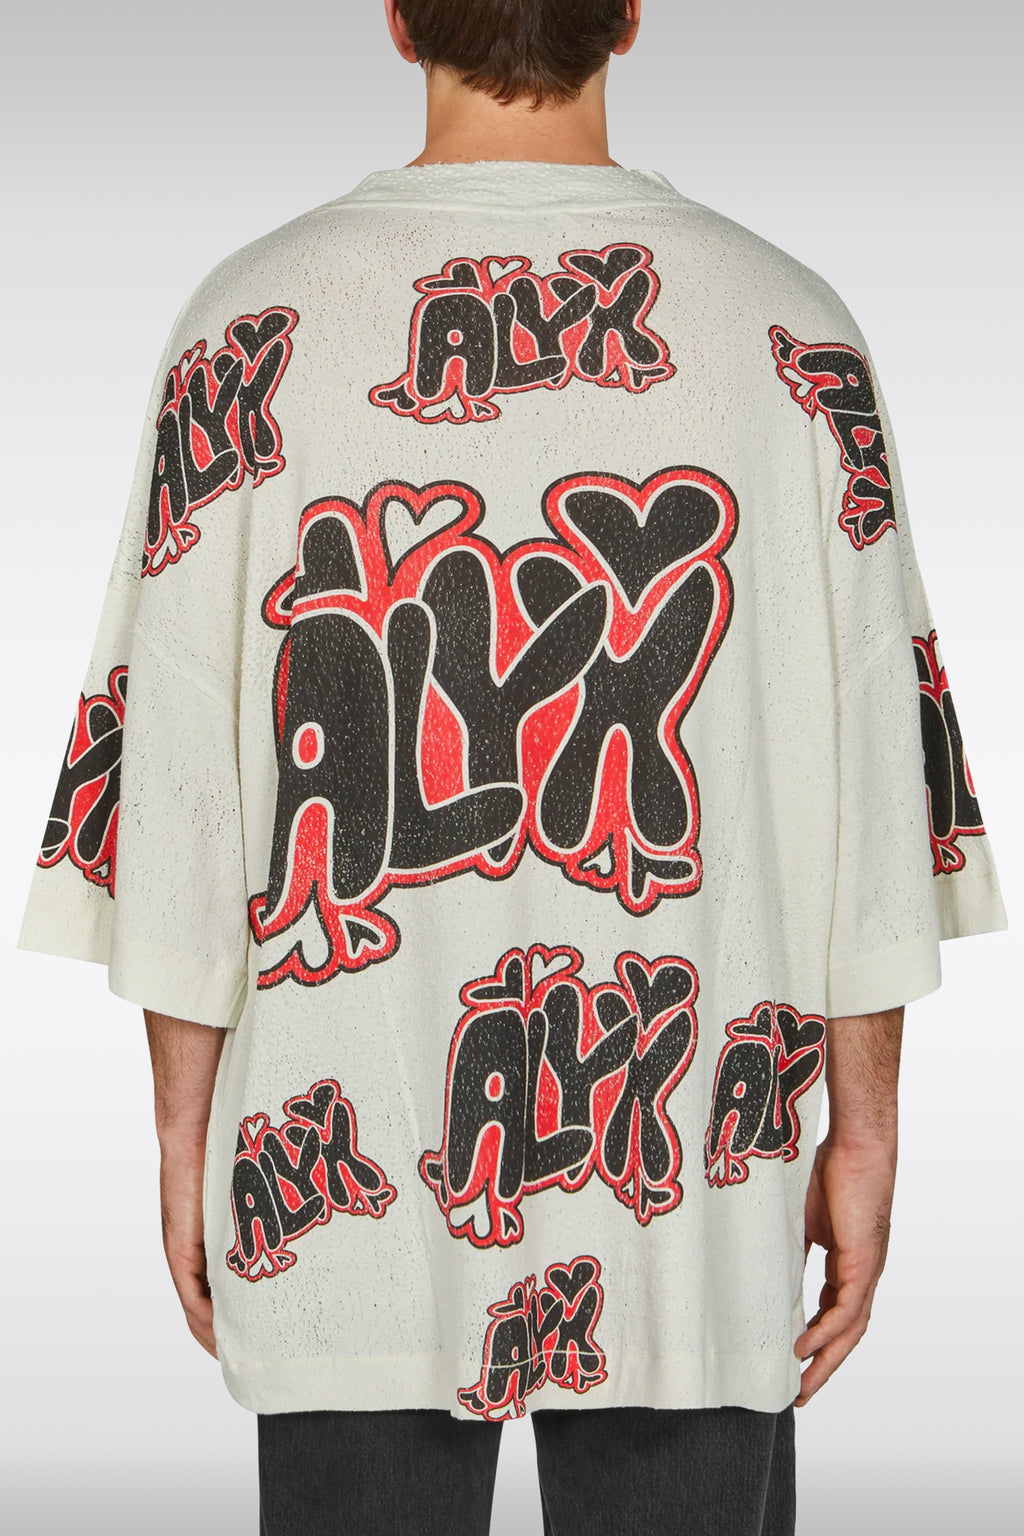 alt-image__Off-white-distressed-jersey-t-shirt-with-logo-pattern---Oversize-Needle-Punch-Graphic-Tee--